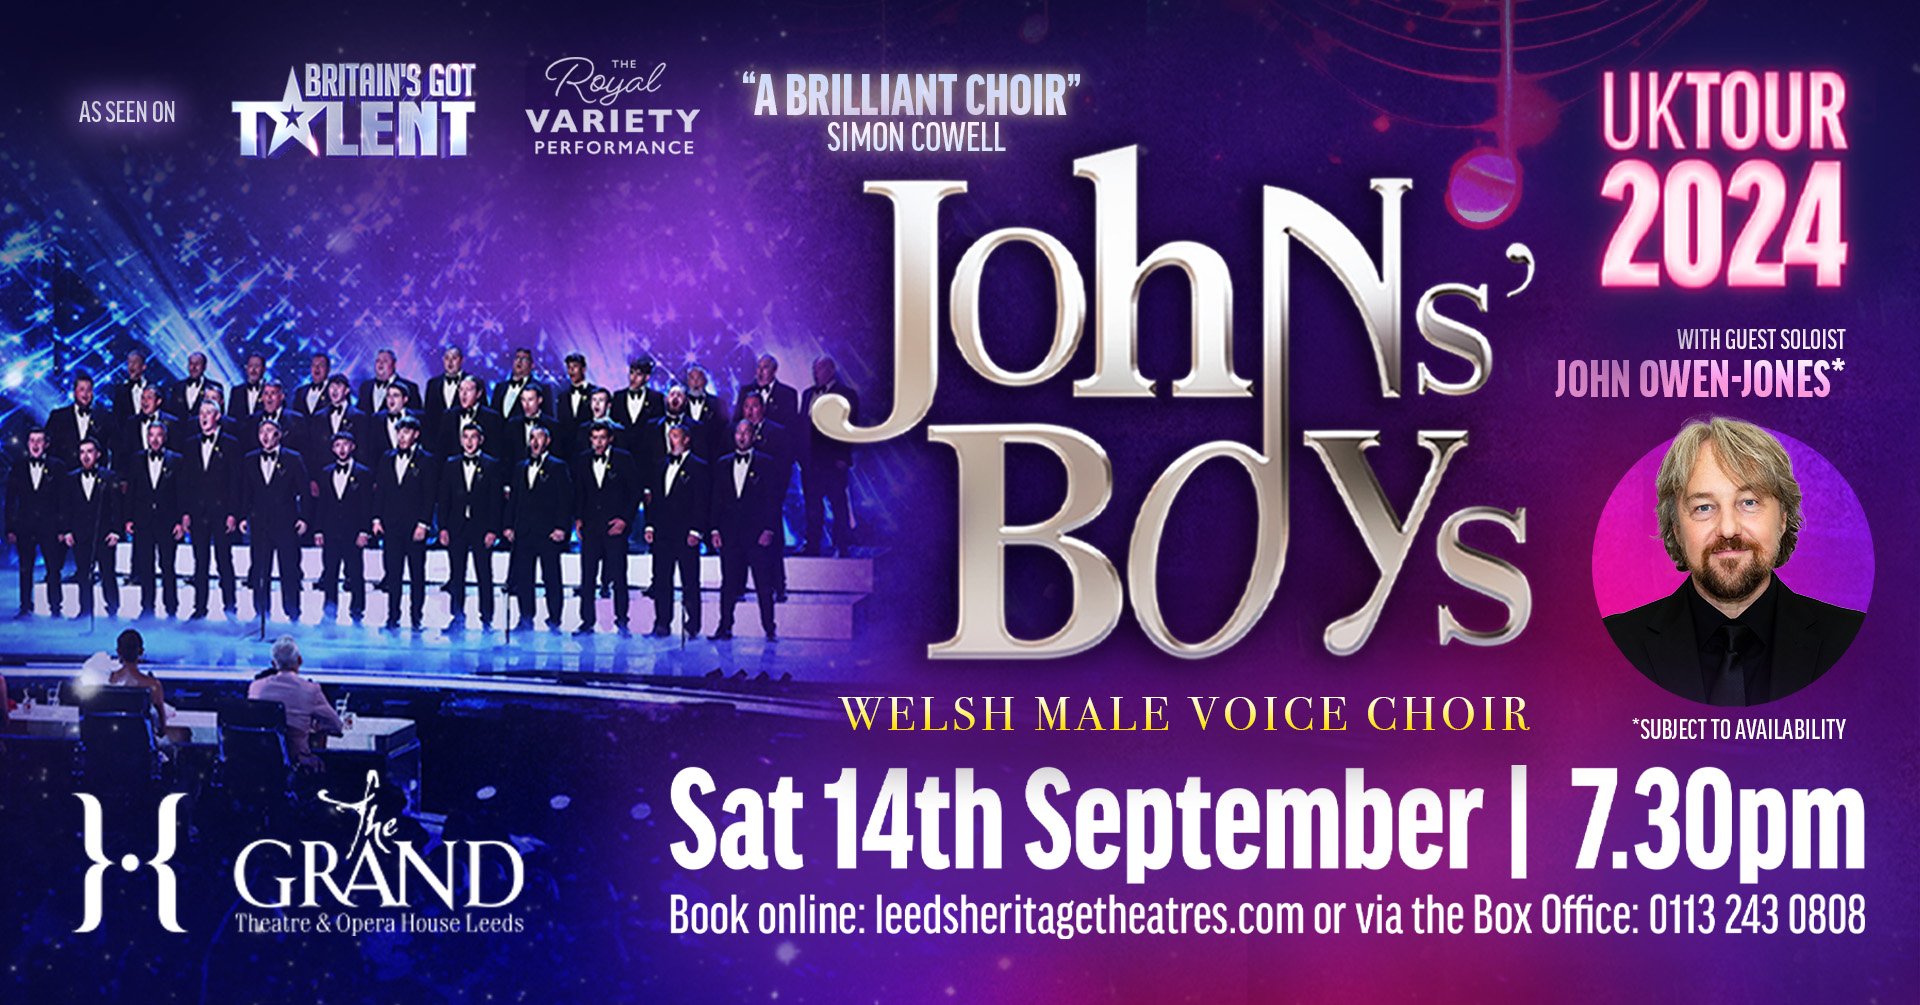 Image name Johns Boys Leeds Grand Theatre 1920x1005 1 1 the 1 image from the post An Evening With Johns' Boys Welsh Choir - As Seen on Britain's Got Talent in Yorkshire.com.